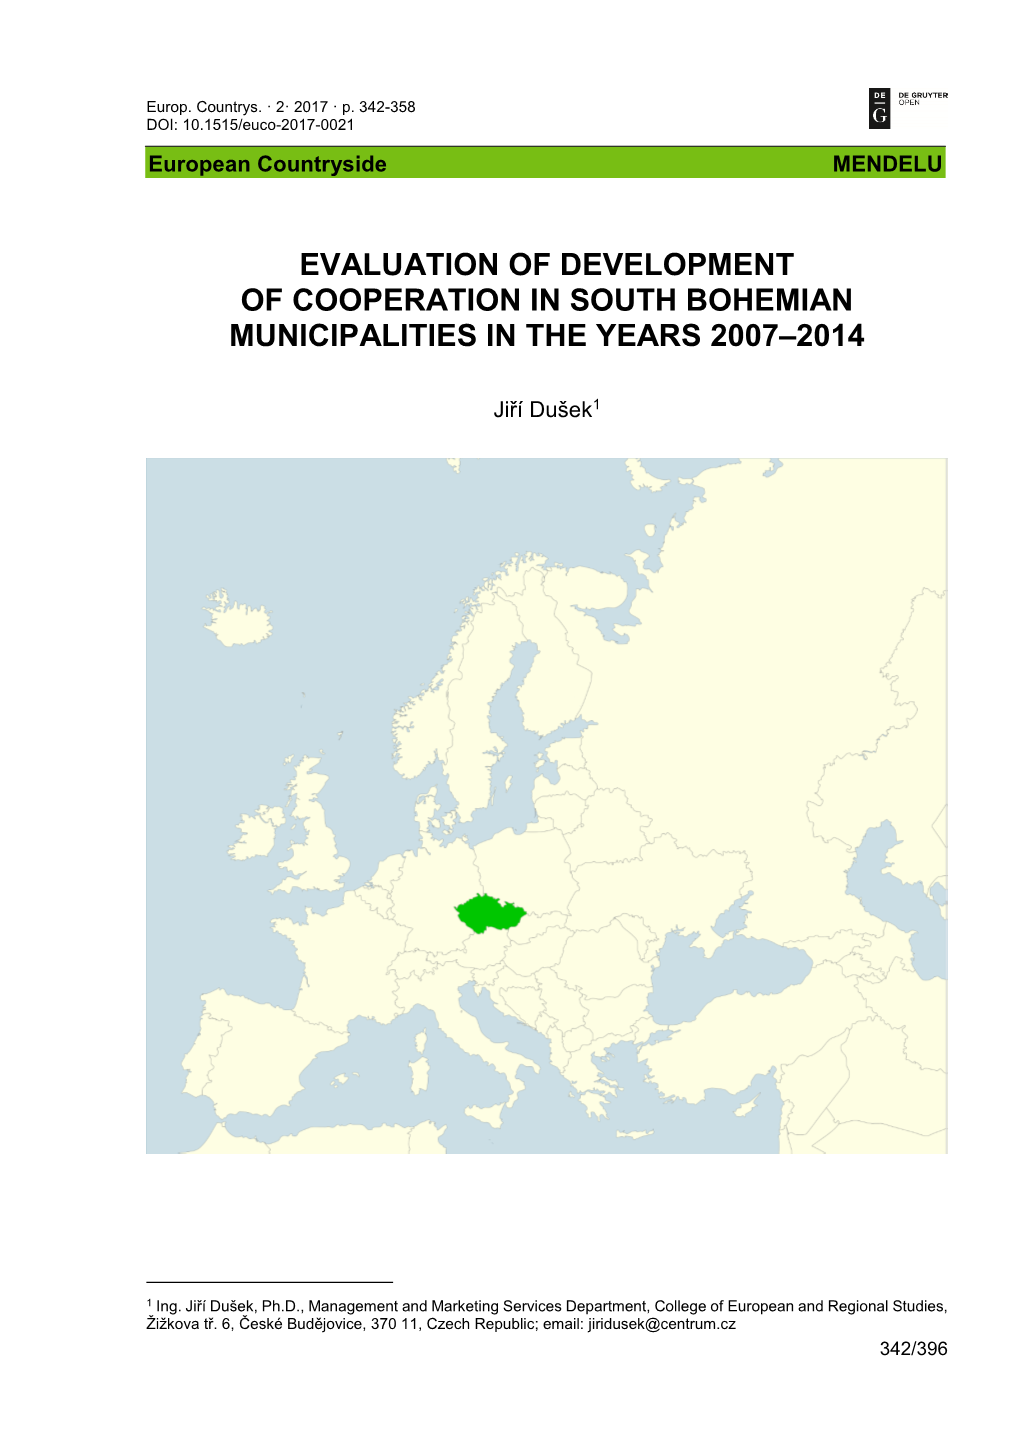 Evaluation of Development of Cooperation in South Bohemian Municipalities in the Years 2007–2014